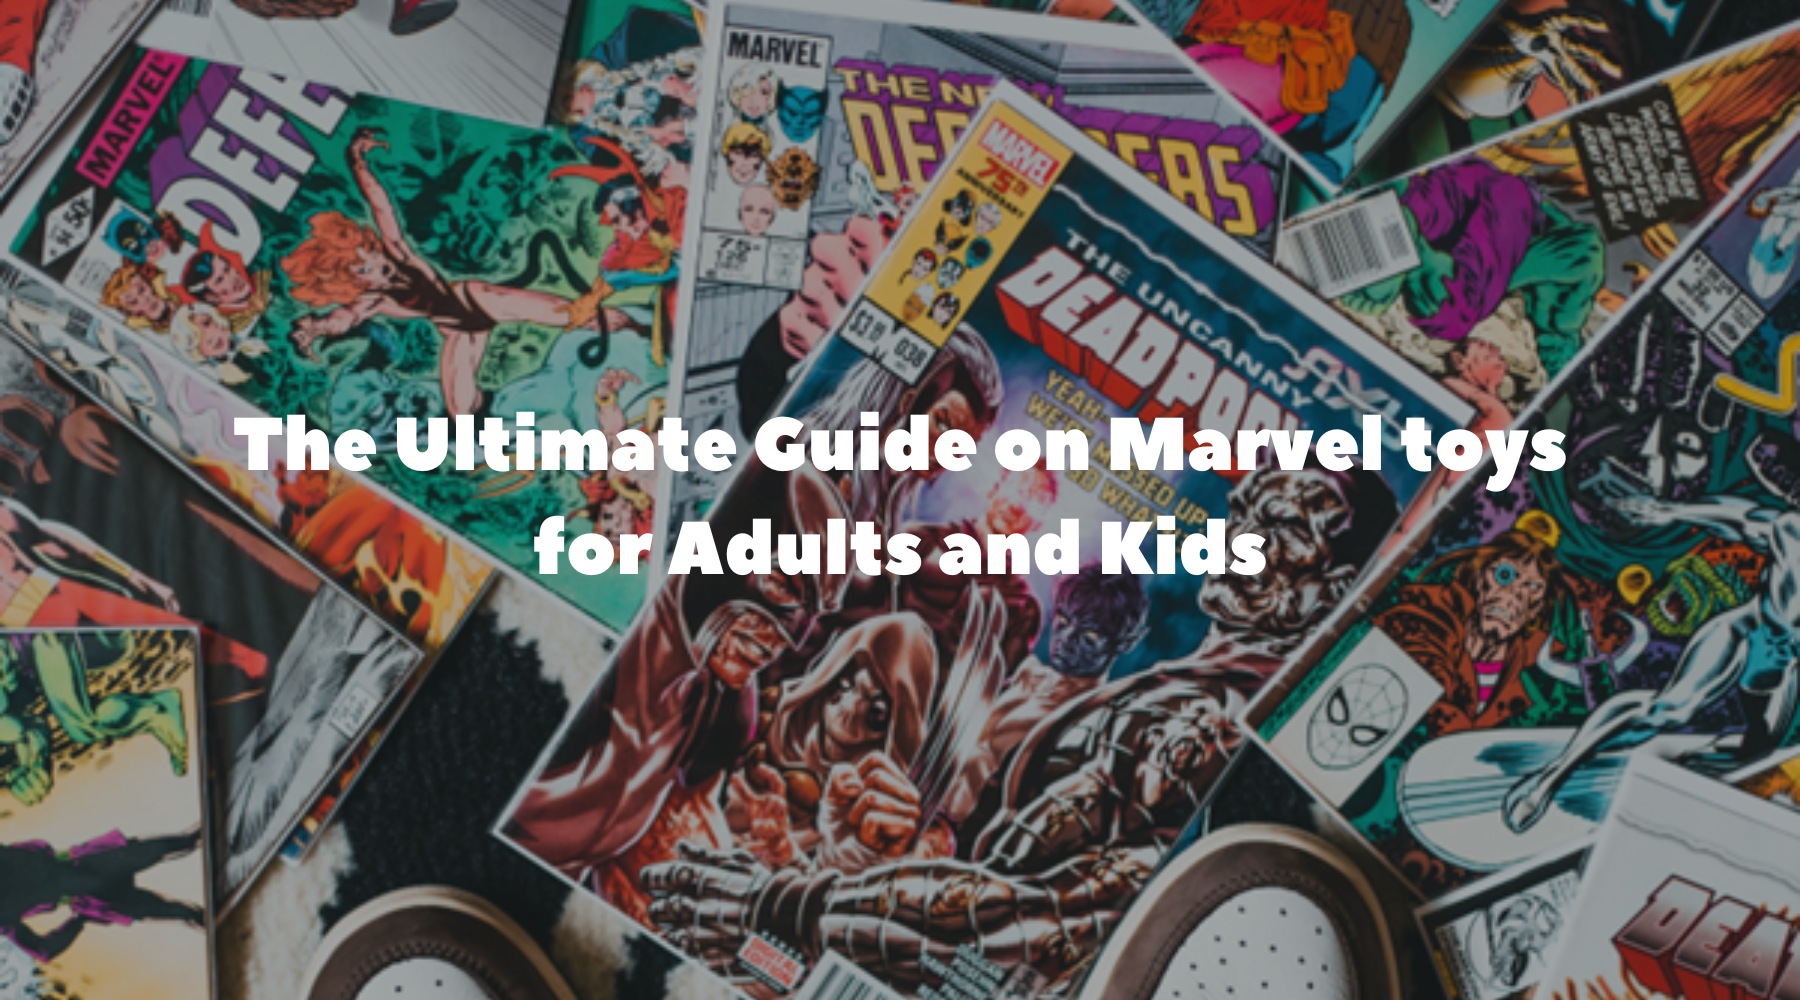 The Ultimate Guide on Marvel toys for Adults and Kids